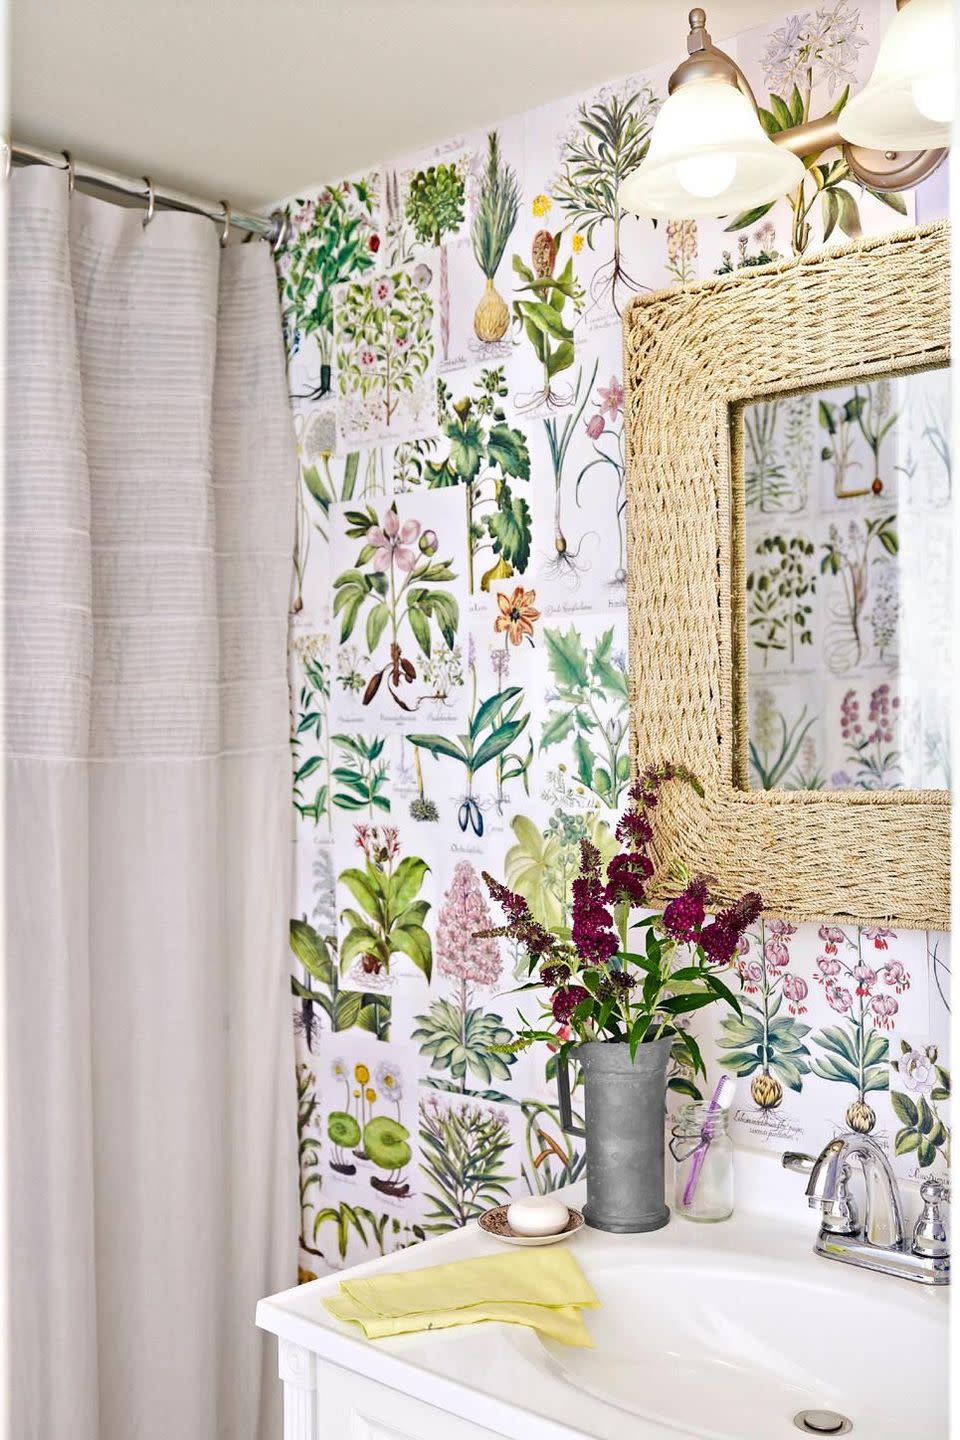 <p>Whenever you step inside your bathroom, you'll feel like you're in a life-size scrapbook if you follow this peel-and-stick technique. Layer dozens of magazine, newspaper, or book pages to craft a totally custom wall covering.</p>